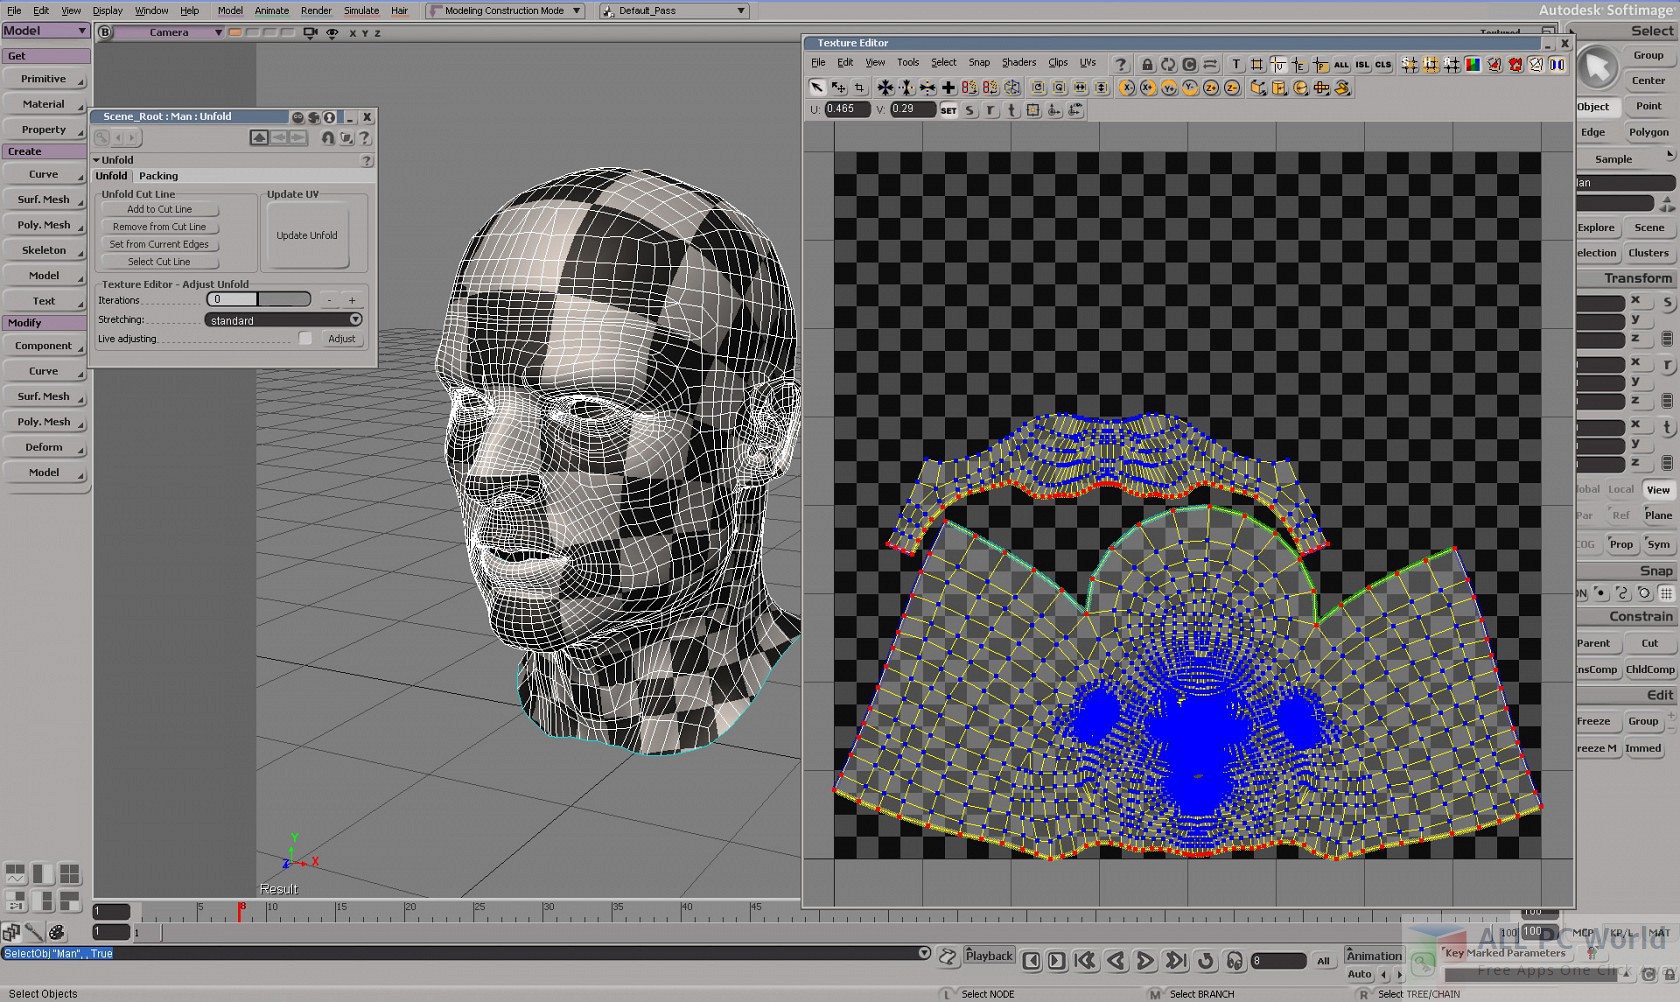 Autodesk SoftImage 2015 Review